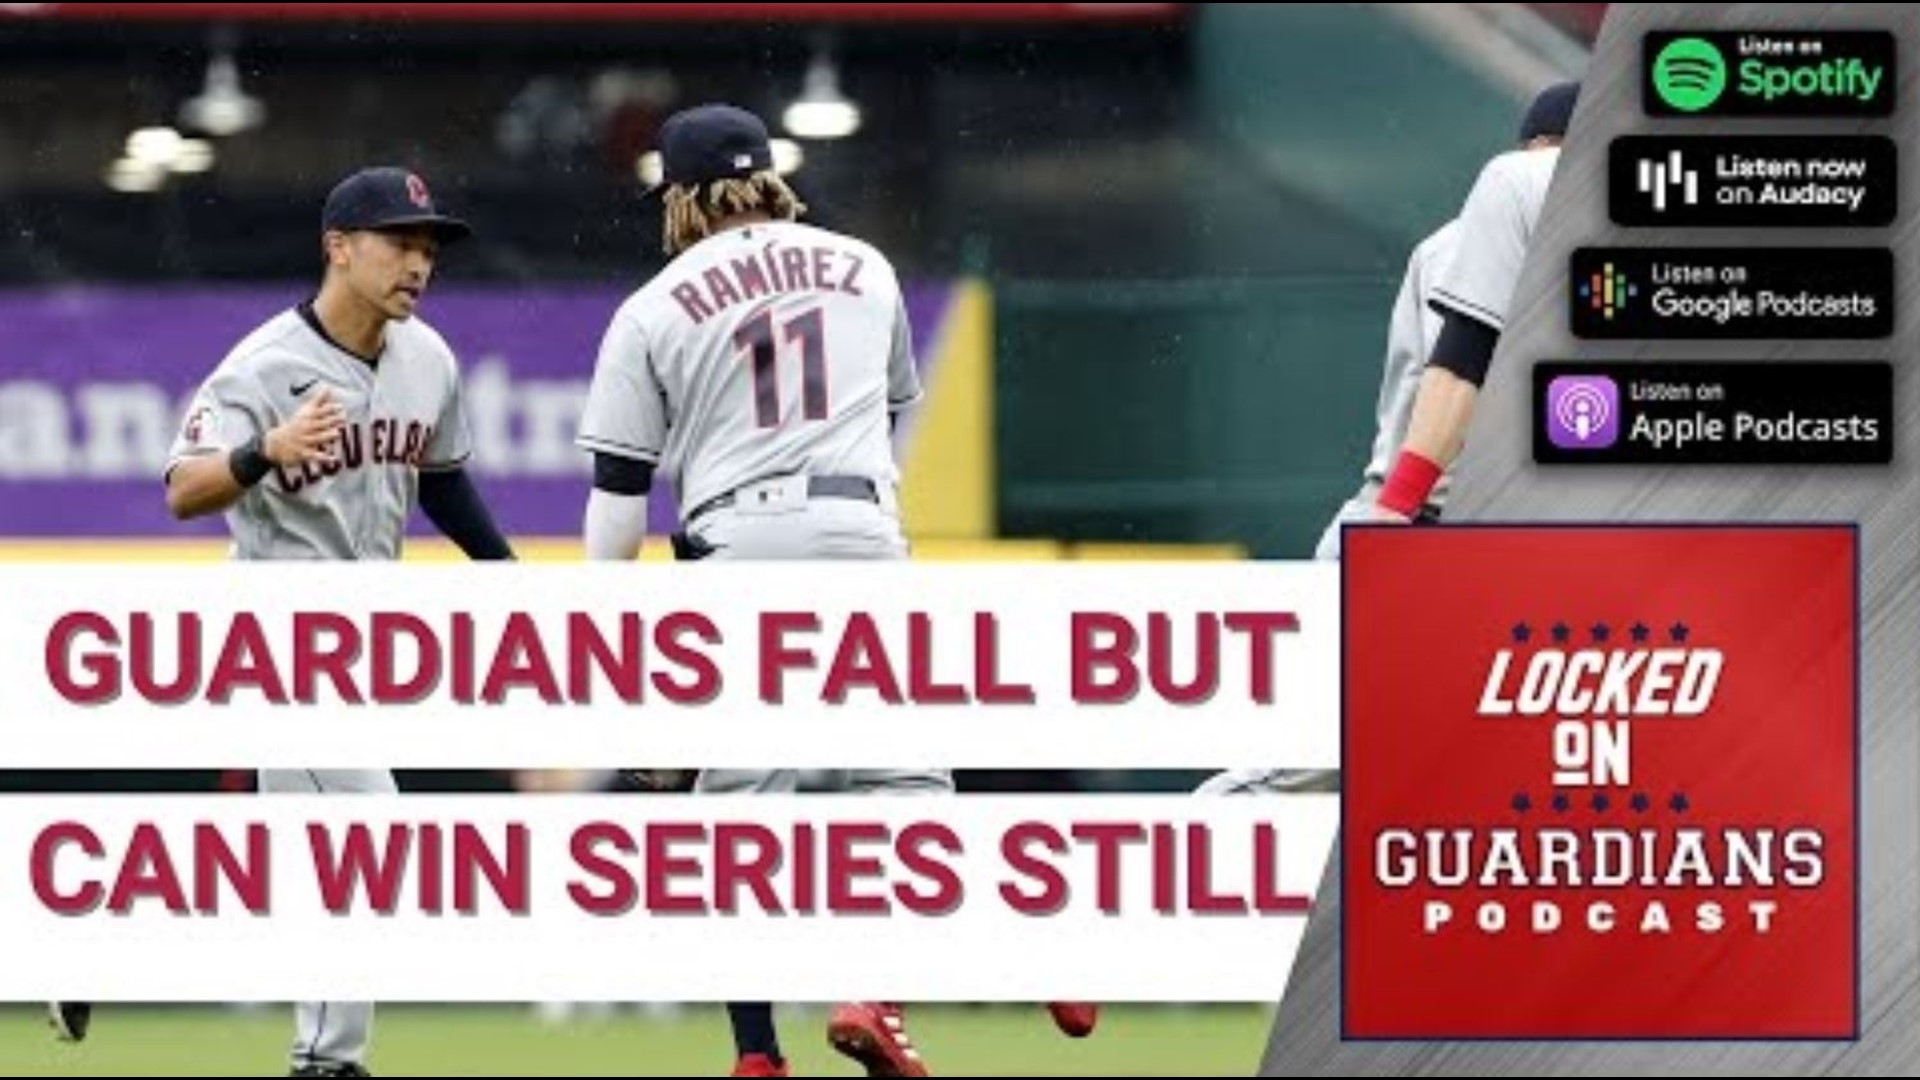 We discuss why you should never slide going into first base. There were a lot of reasons the Guardians lost this game, but they had a chance to extend it and didn’t.